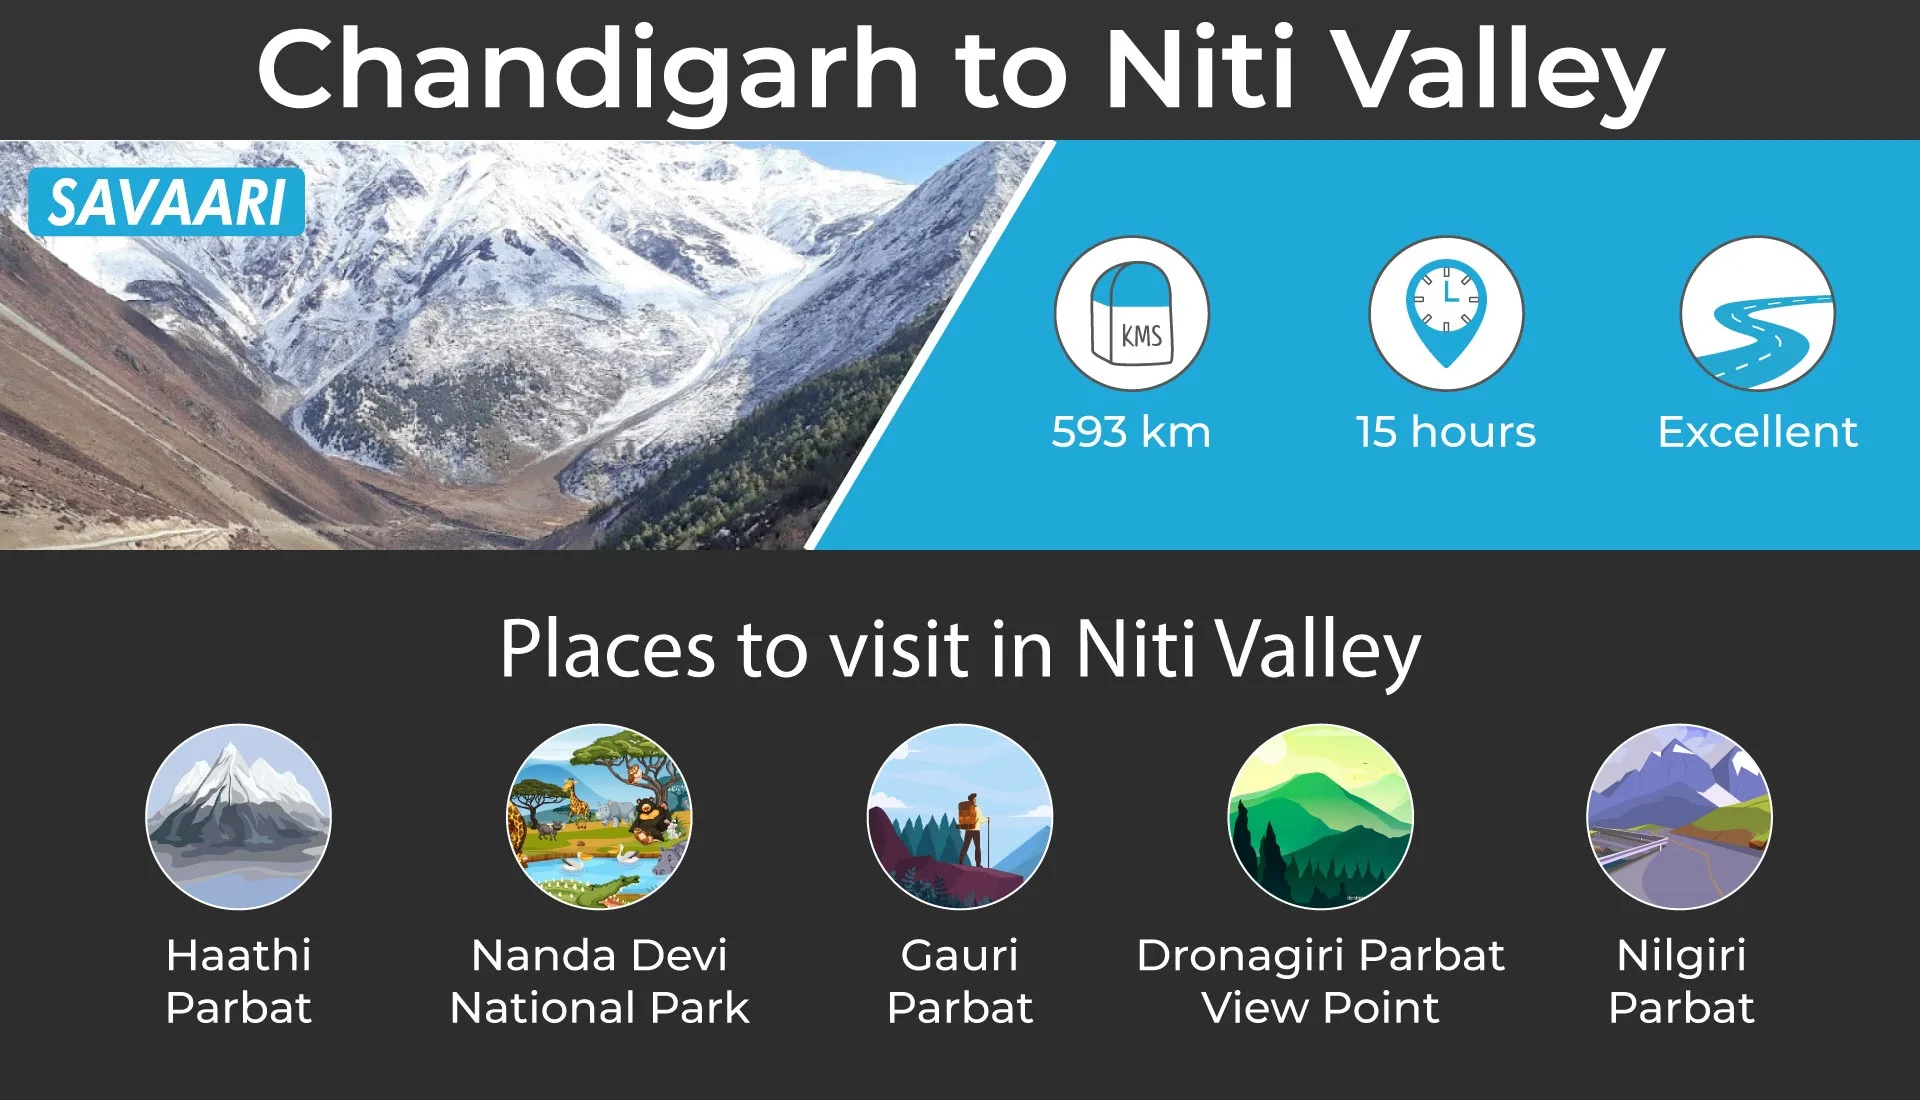 Chandigarh to Niti valley a scenic road trip